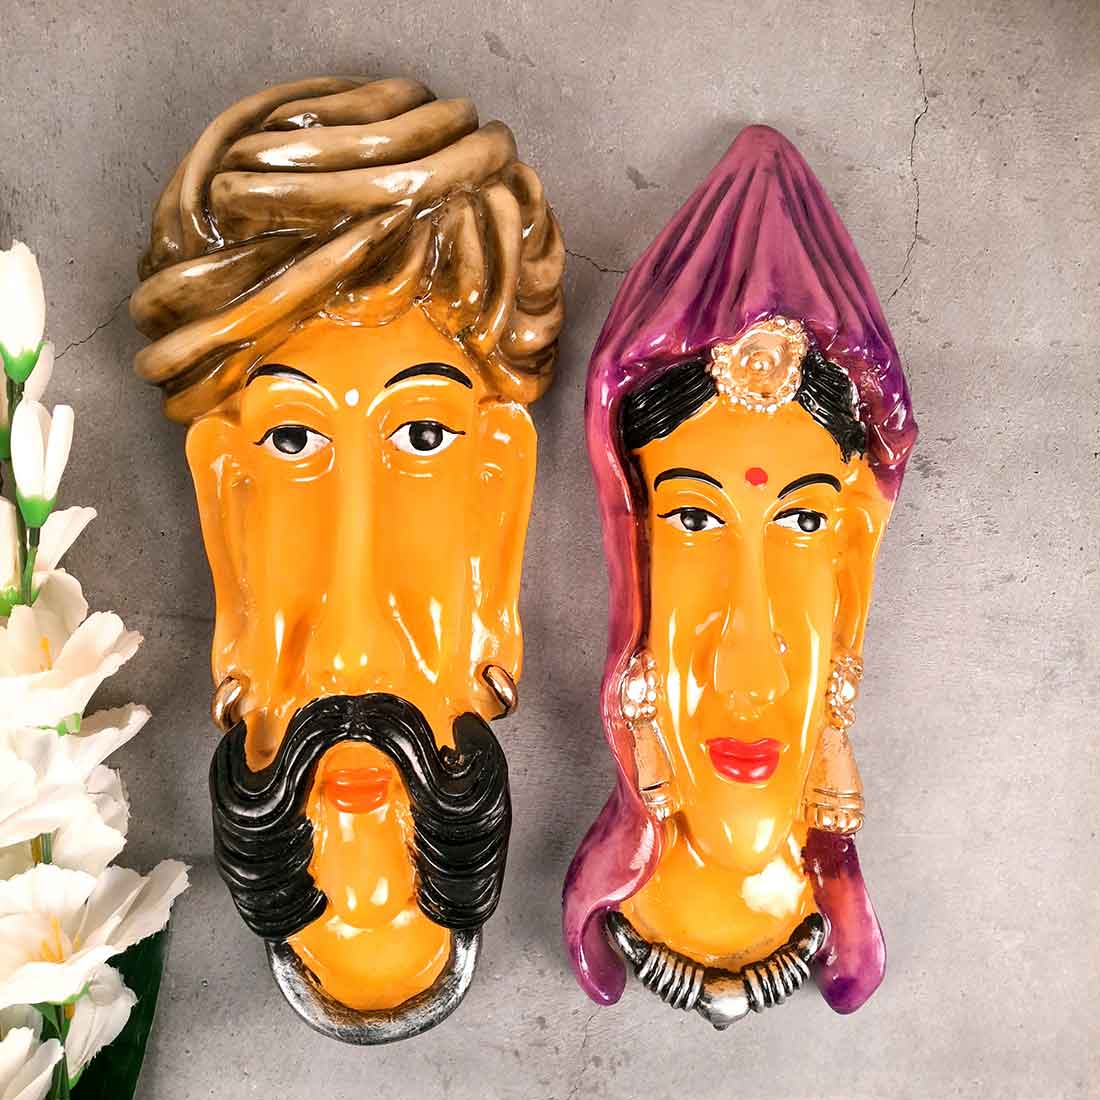 Man & Woman Face Wall Hanging - For Home, Wall Decor & Gifts - 15 Inch - Apkamart